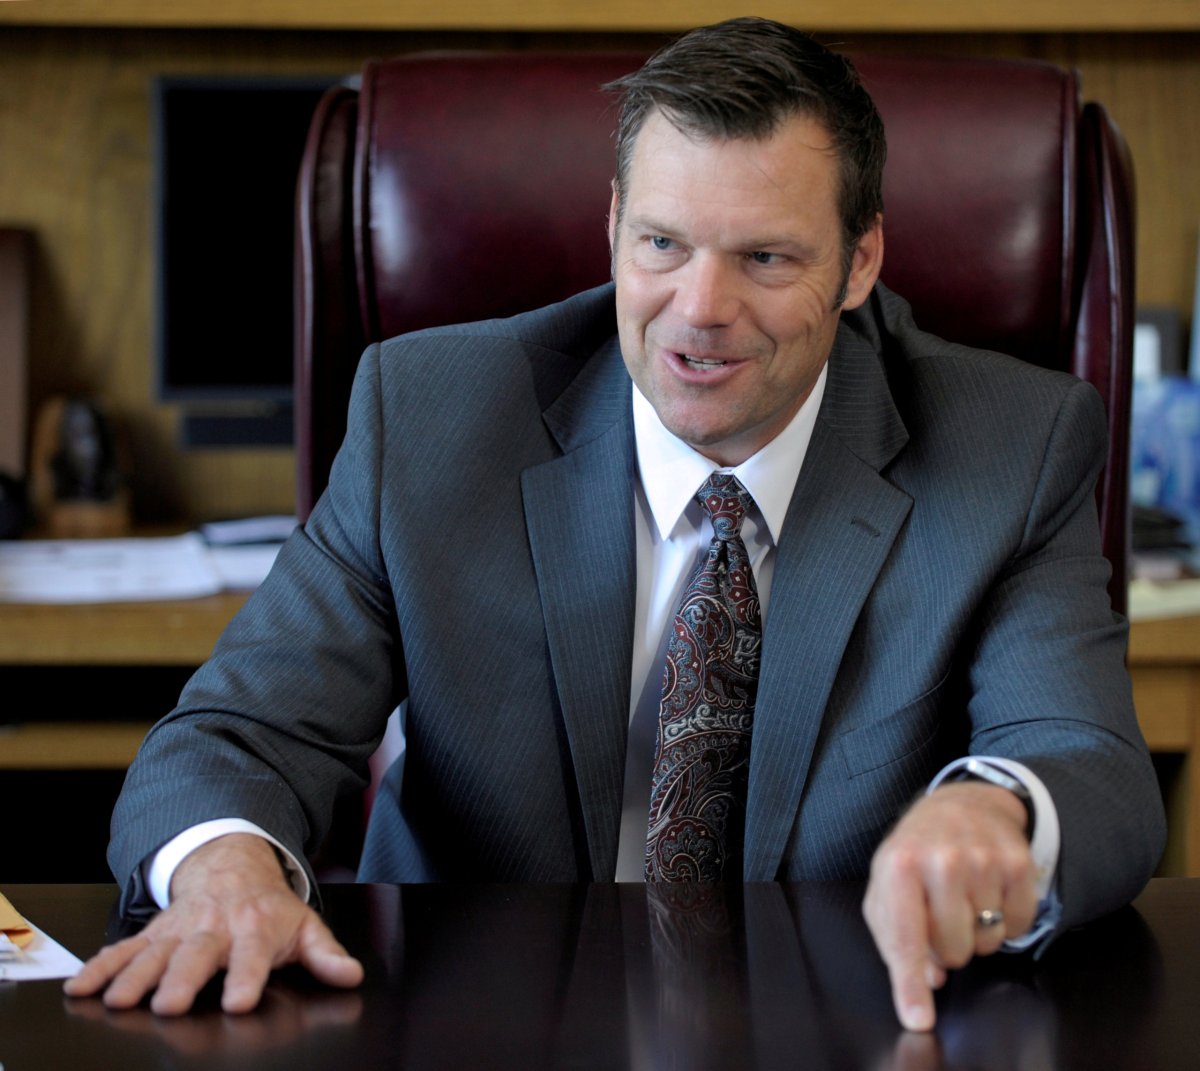 Judge says no decision for at least a month in Kansas voter ID case